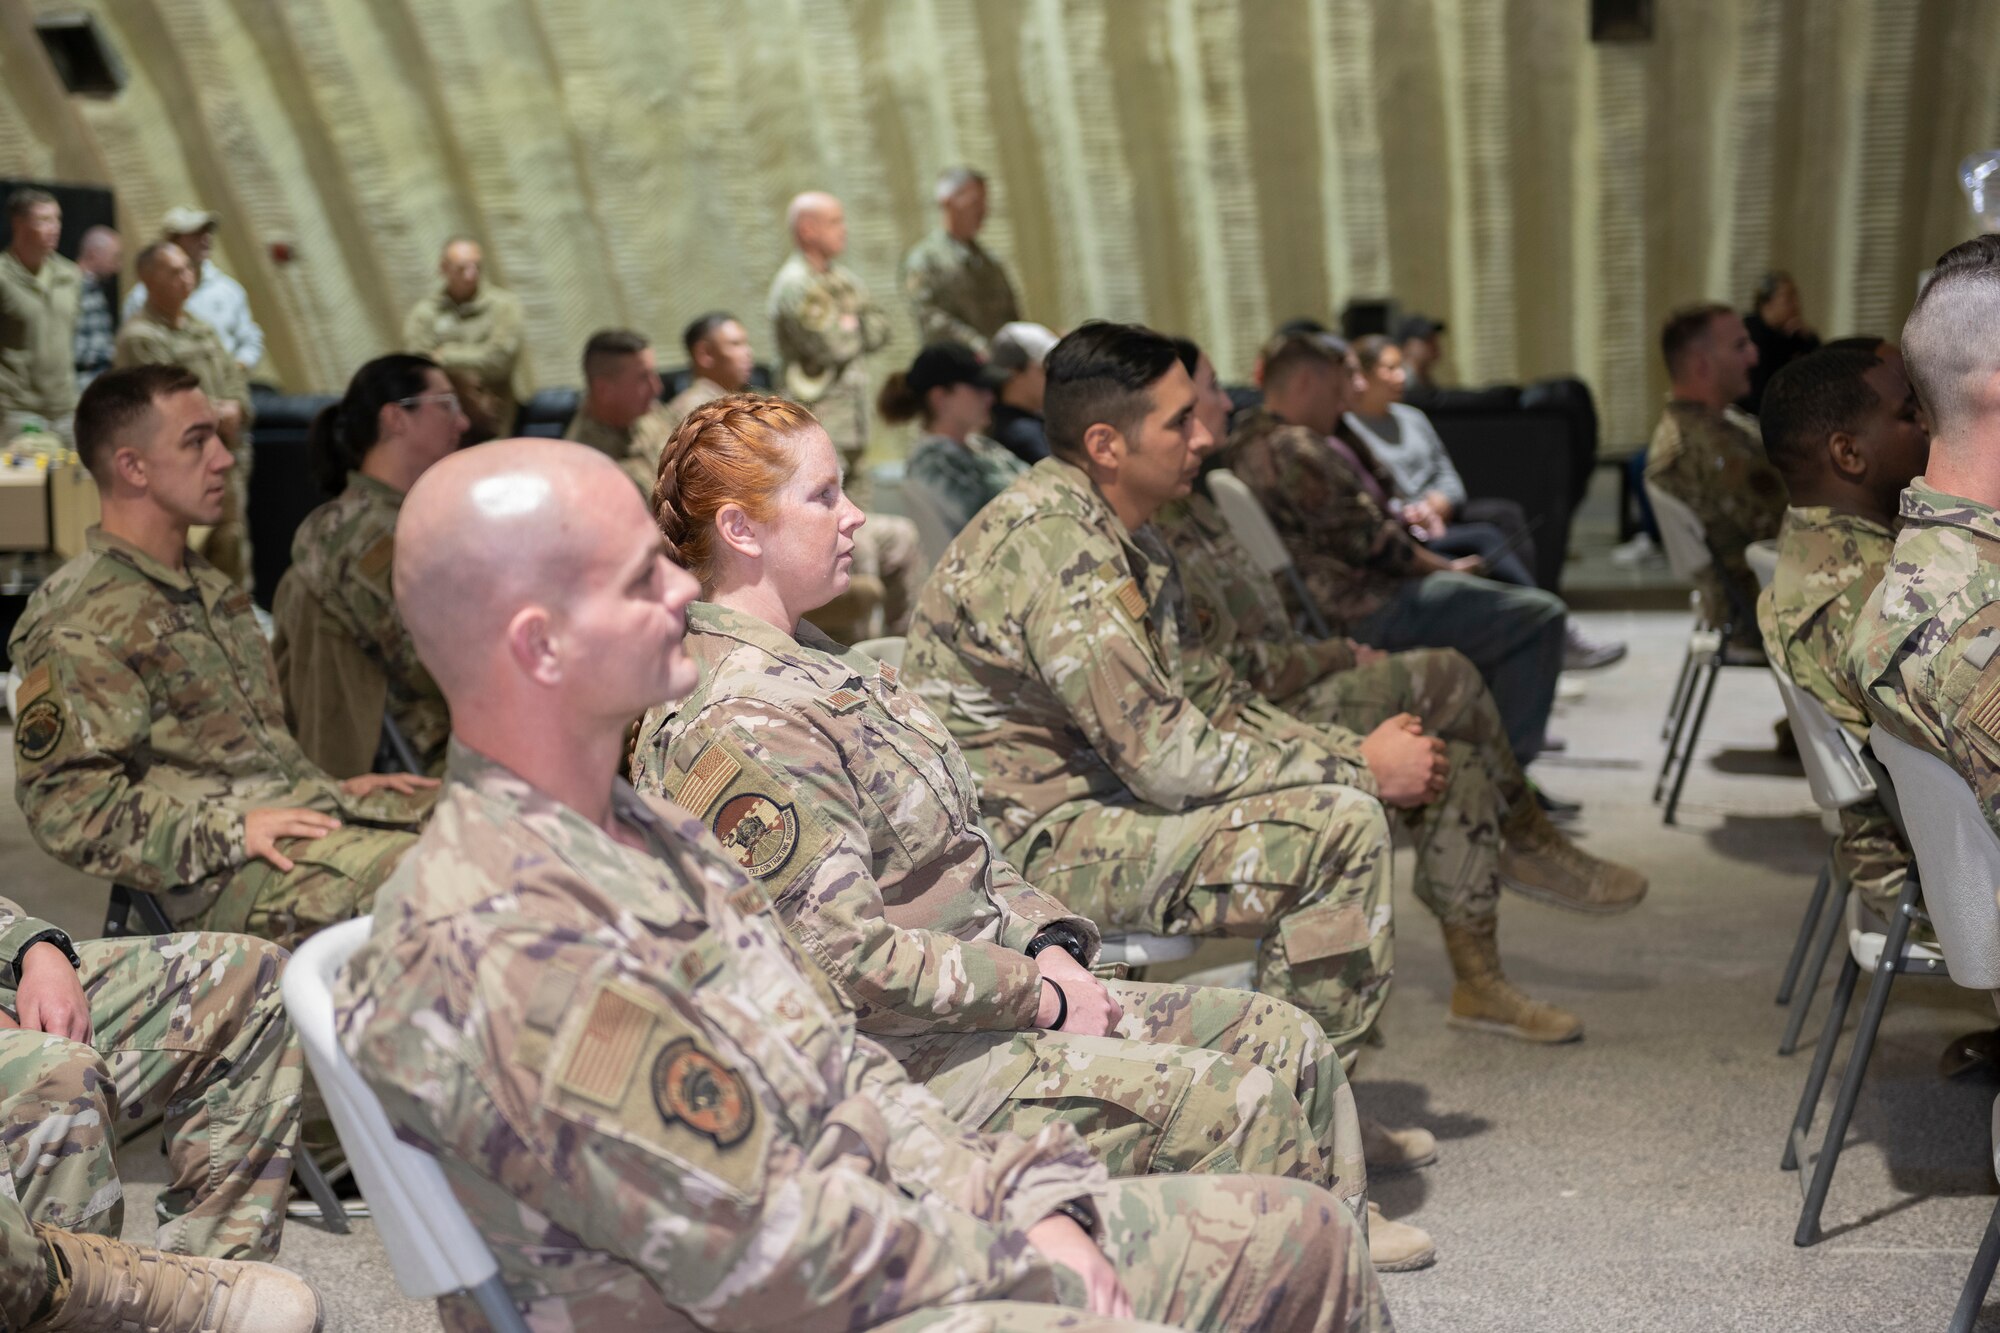 U.S. Airmen with the 332nd Air Expeditionary Wing listen to speaker during a First Sergeant Symposium graduation